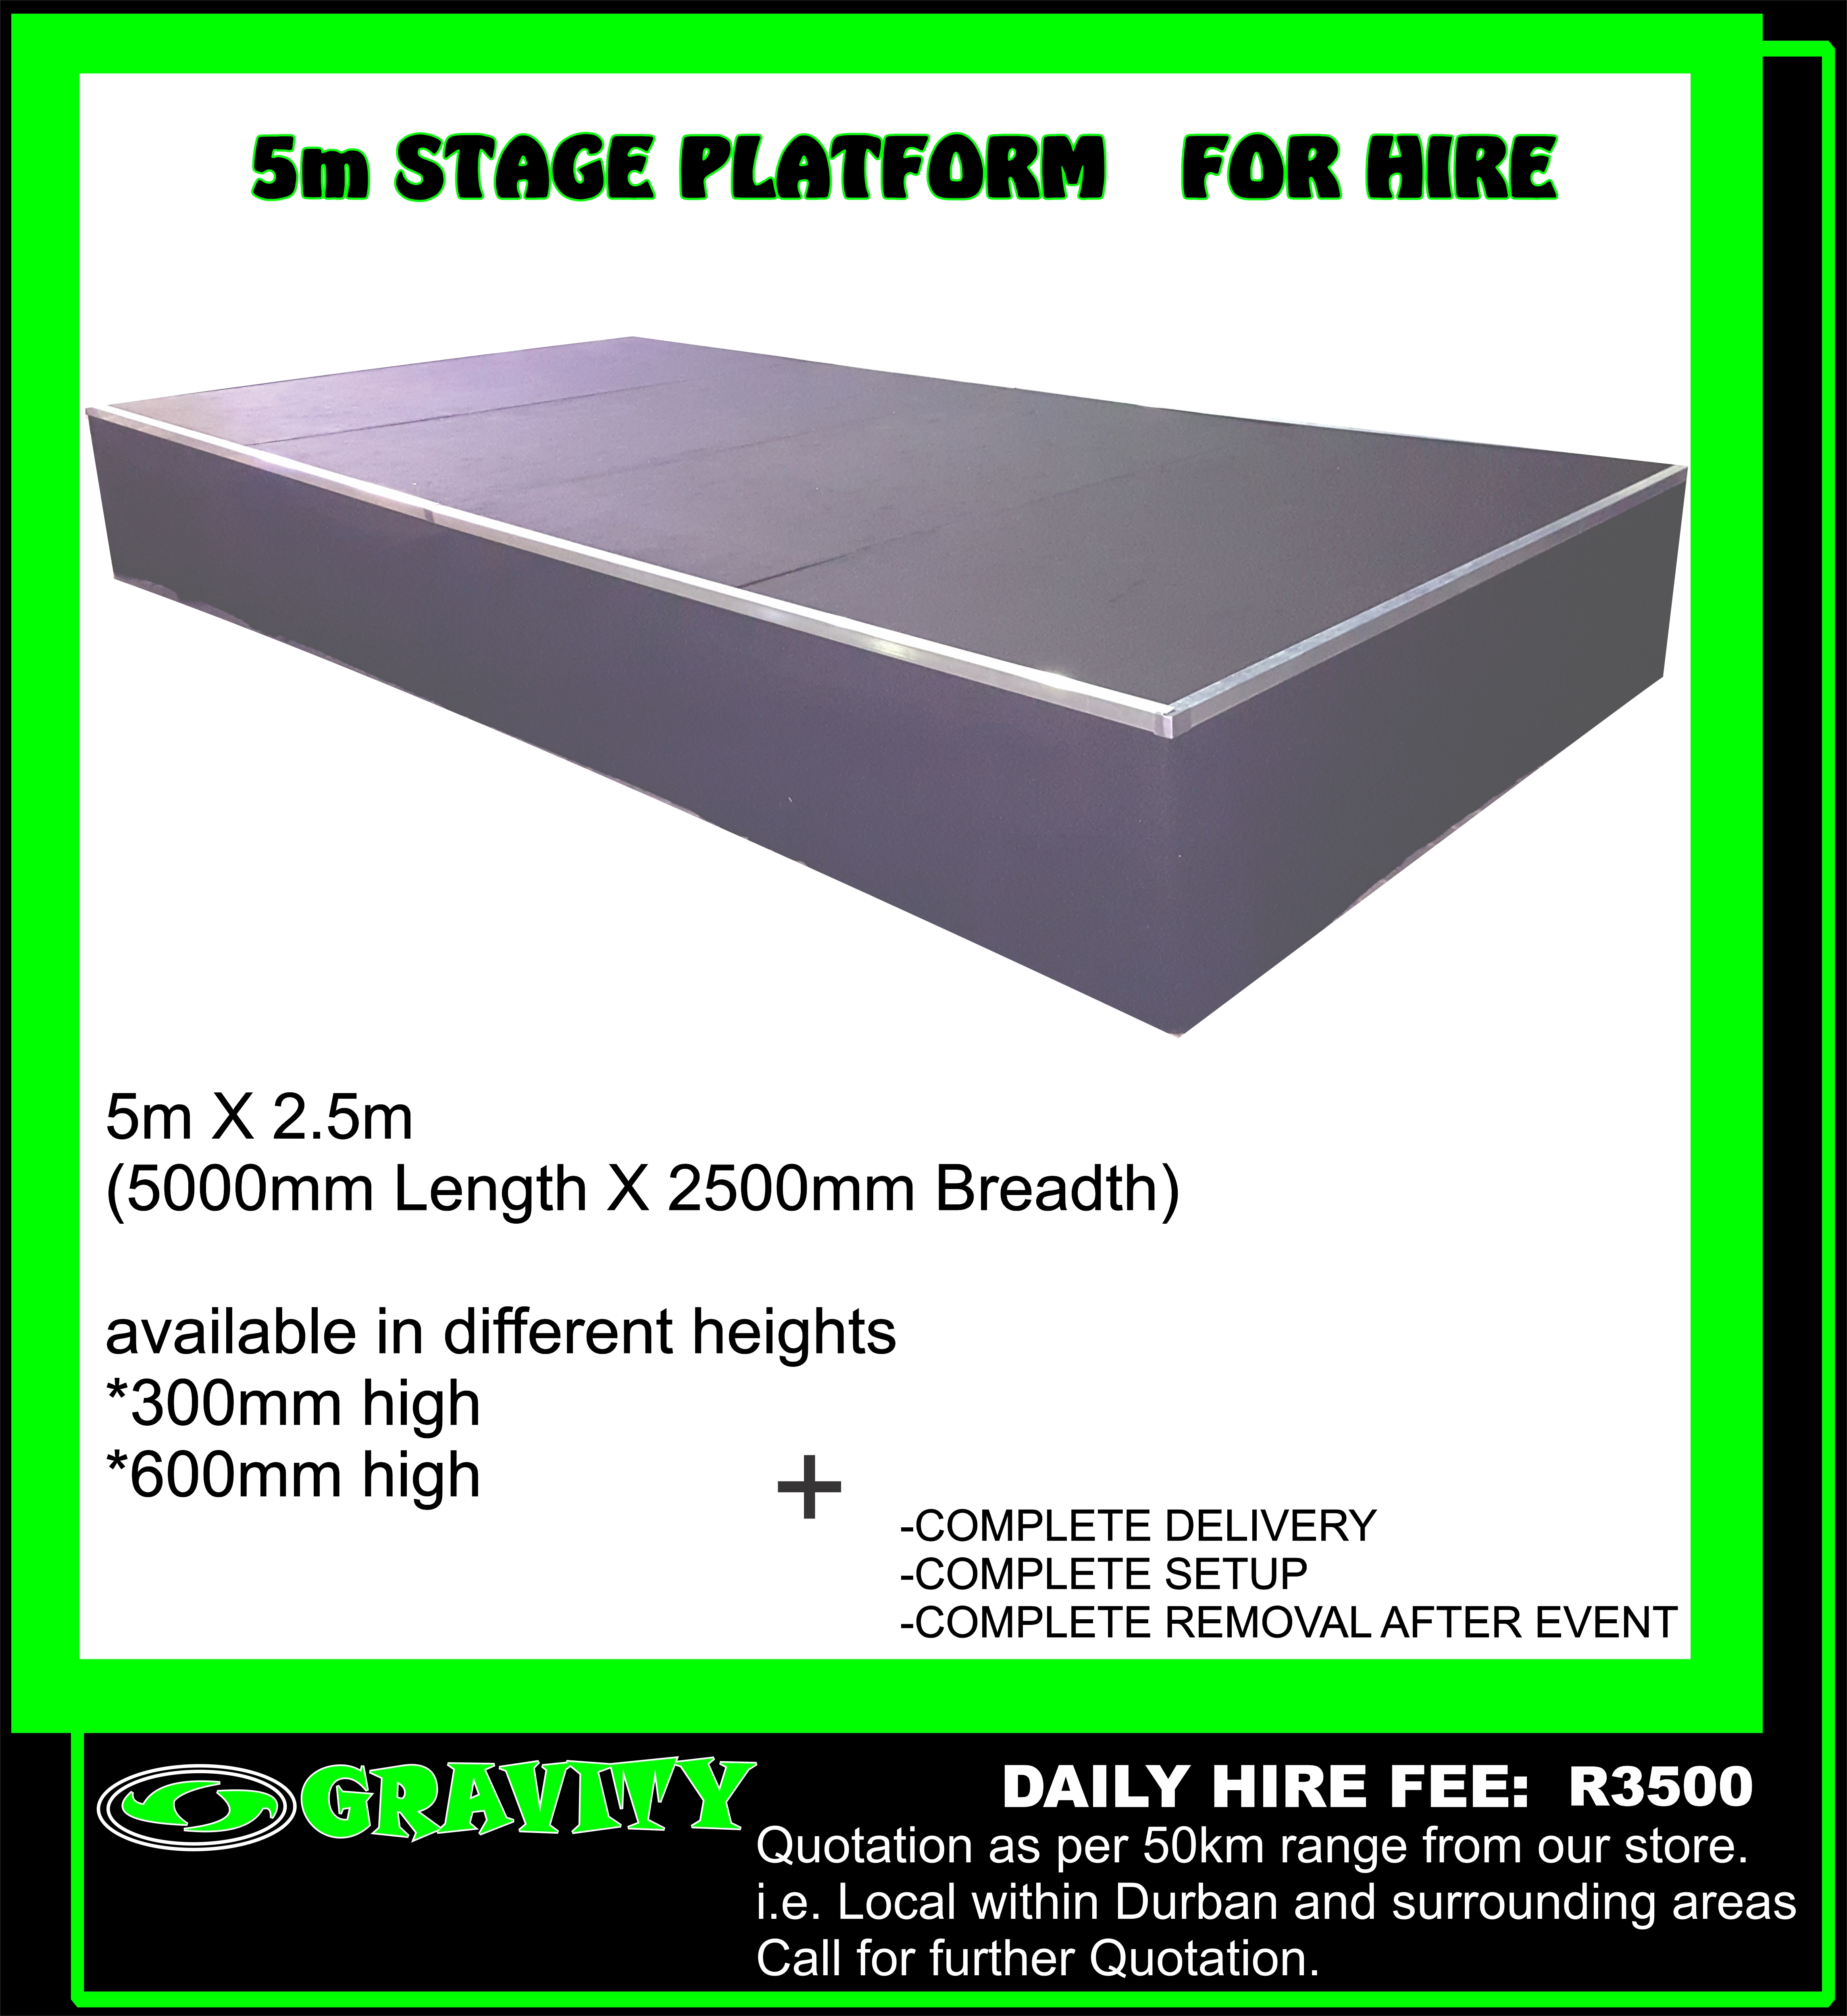 HIRE AND INSTALLATION OF STAGE PLATFORMS FOR HIRE AT GRAVITY SOUND AND LIGHTING WAREHOUSE DURBAN 0315072736 STAGE HIRE STAGE RENTALS FOR EVENTS AND CONCERTS AND STAGE MEETINGS STAGE PLATFORMS WITH SETUP AND DELIVERY AT GRAVITY DJ STORE 0315072436